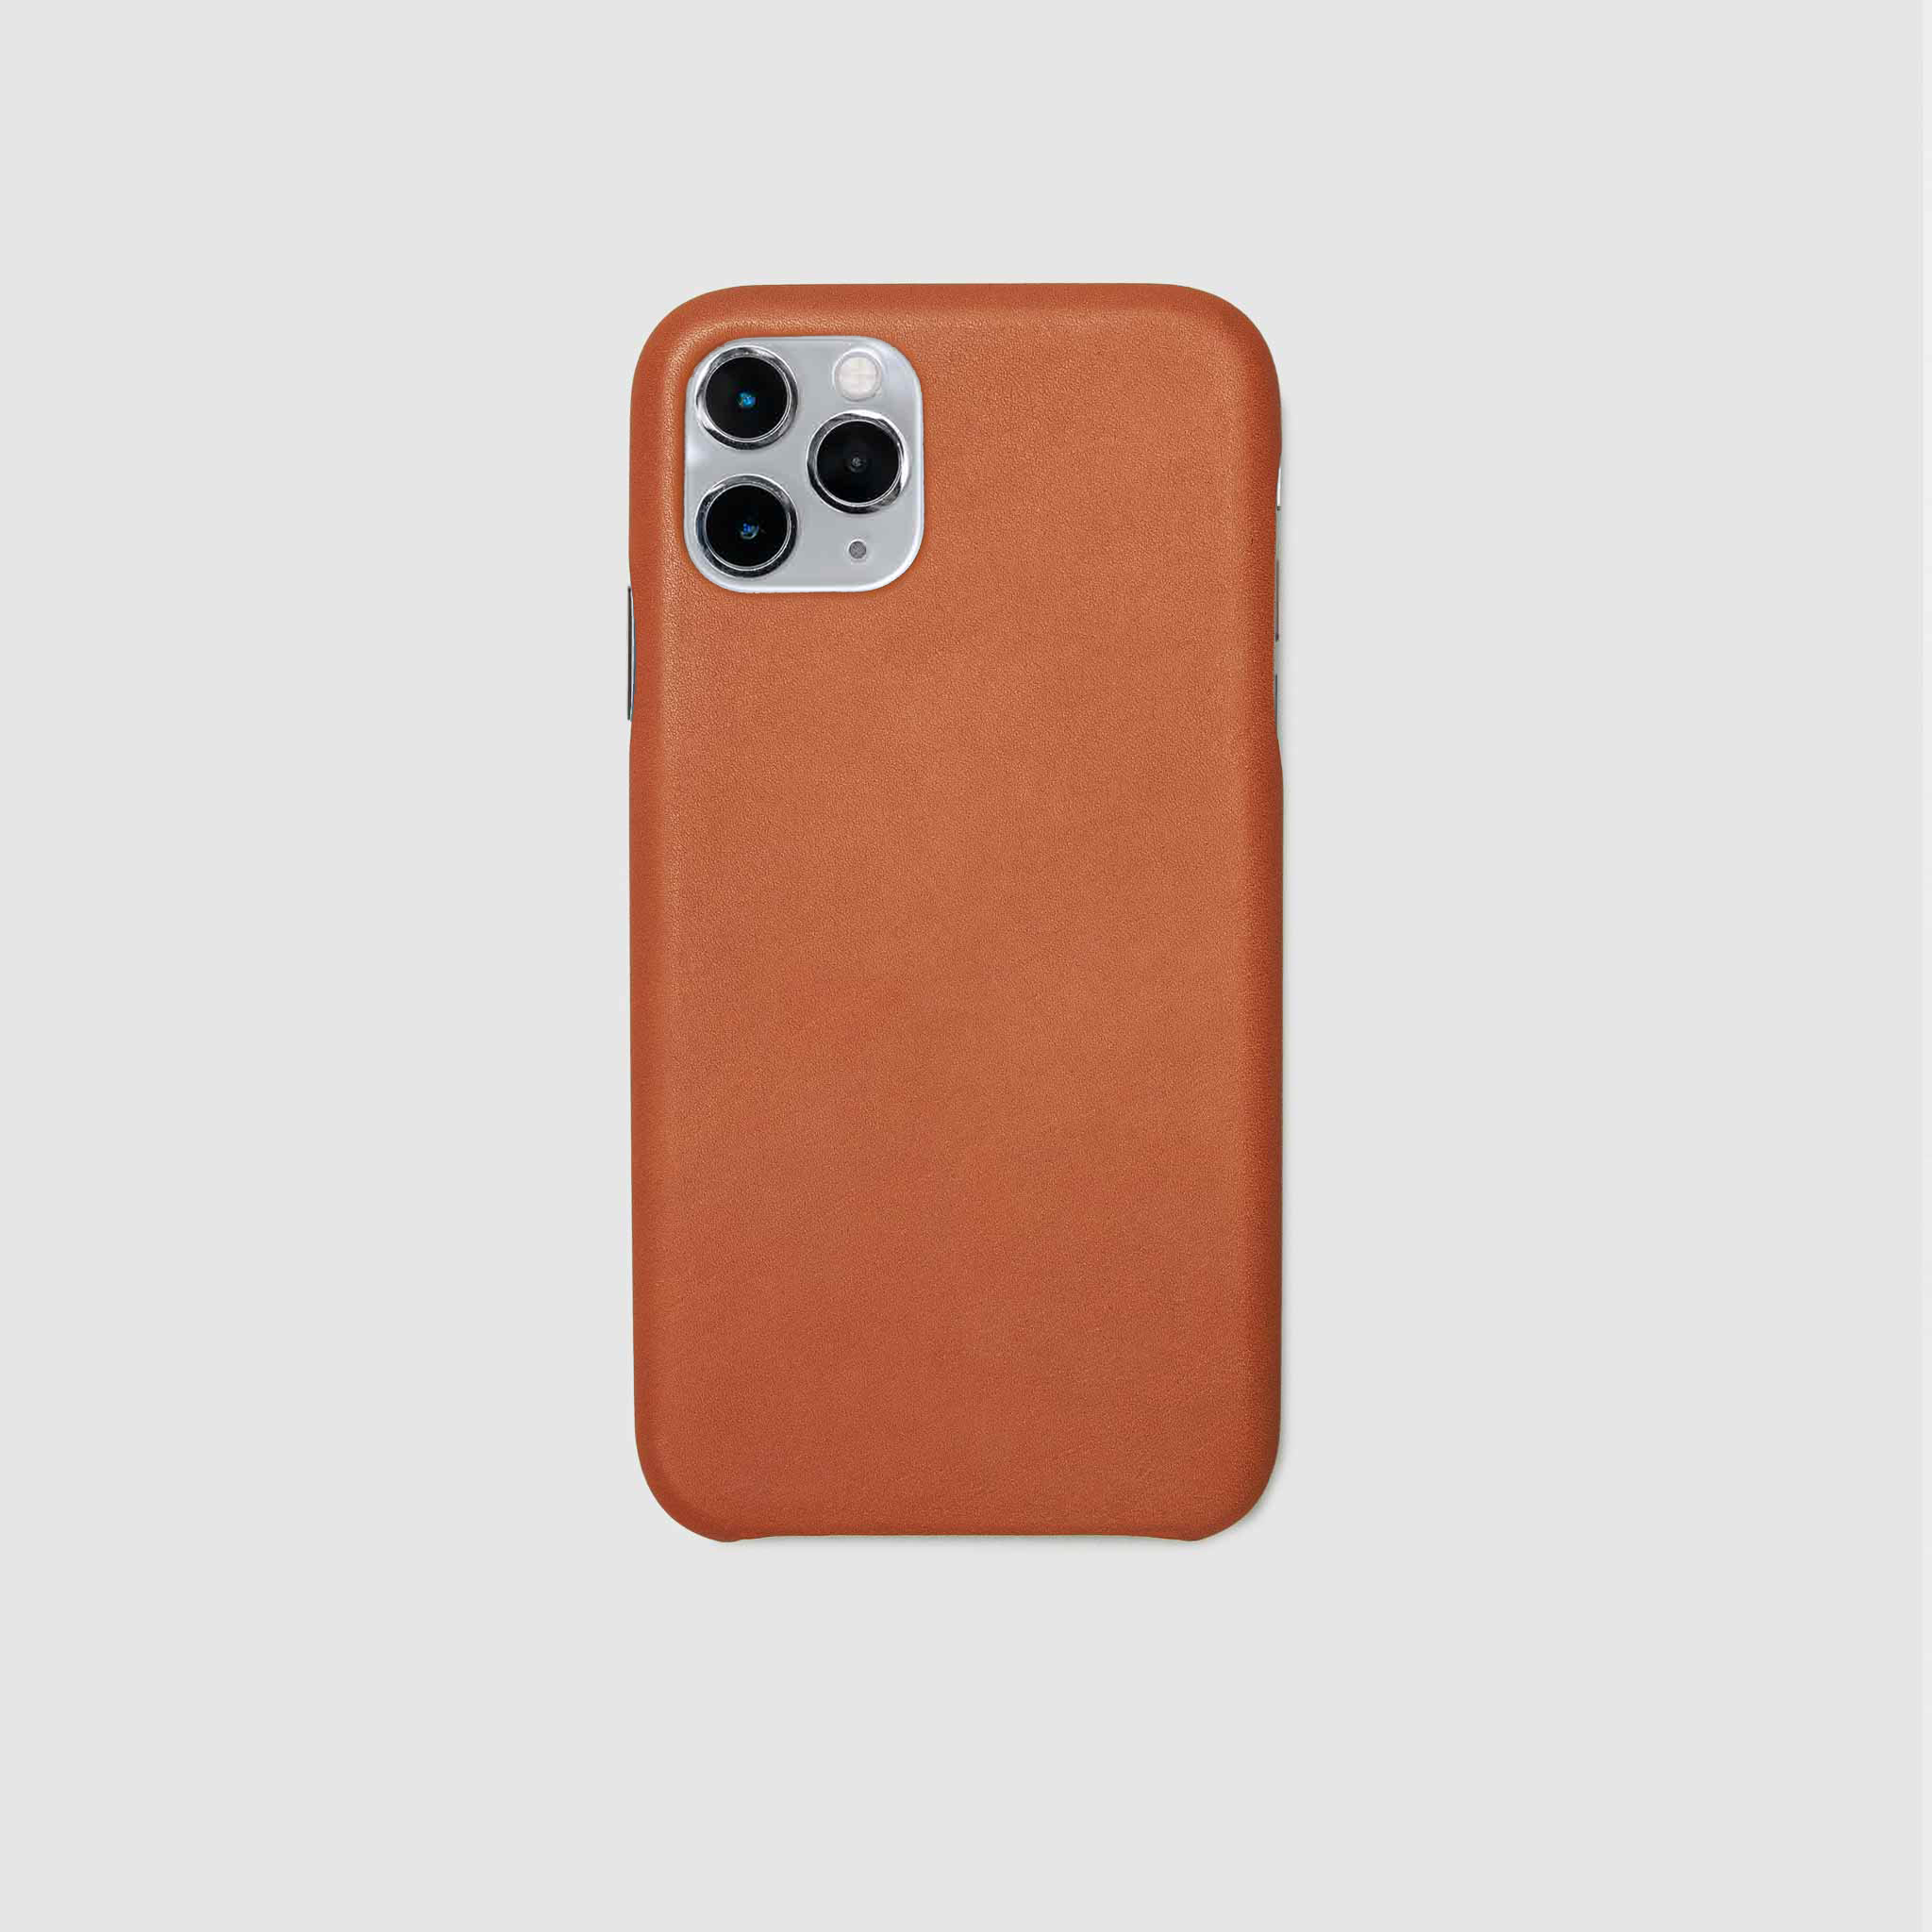 anson calder iphone case french calfskin 11 eleven pro max leather !iphone11pro-iphone11promax *hover _cognac